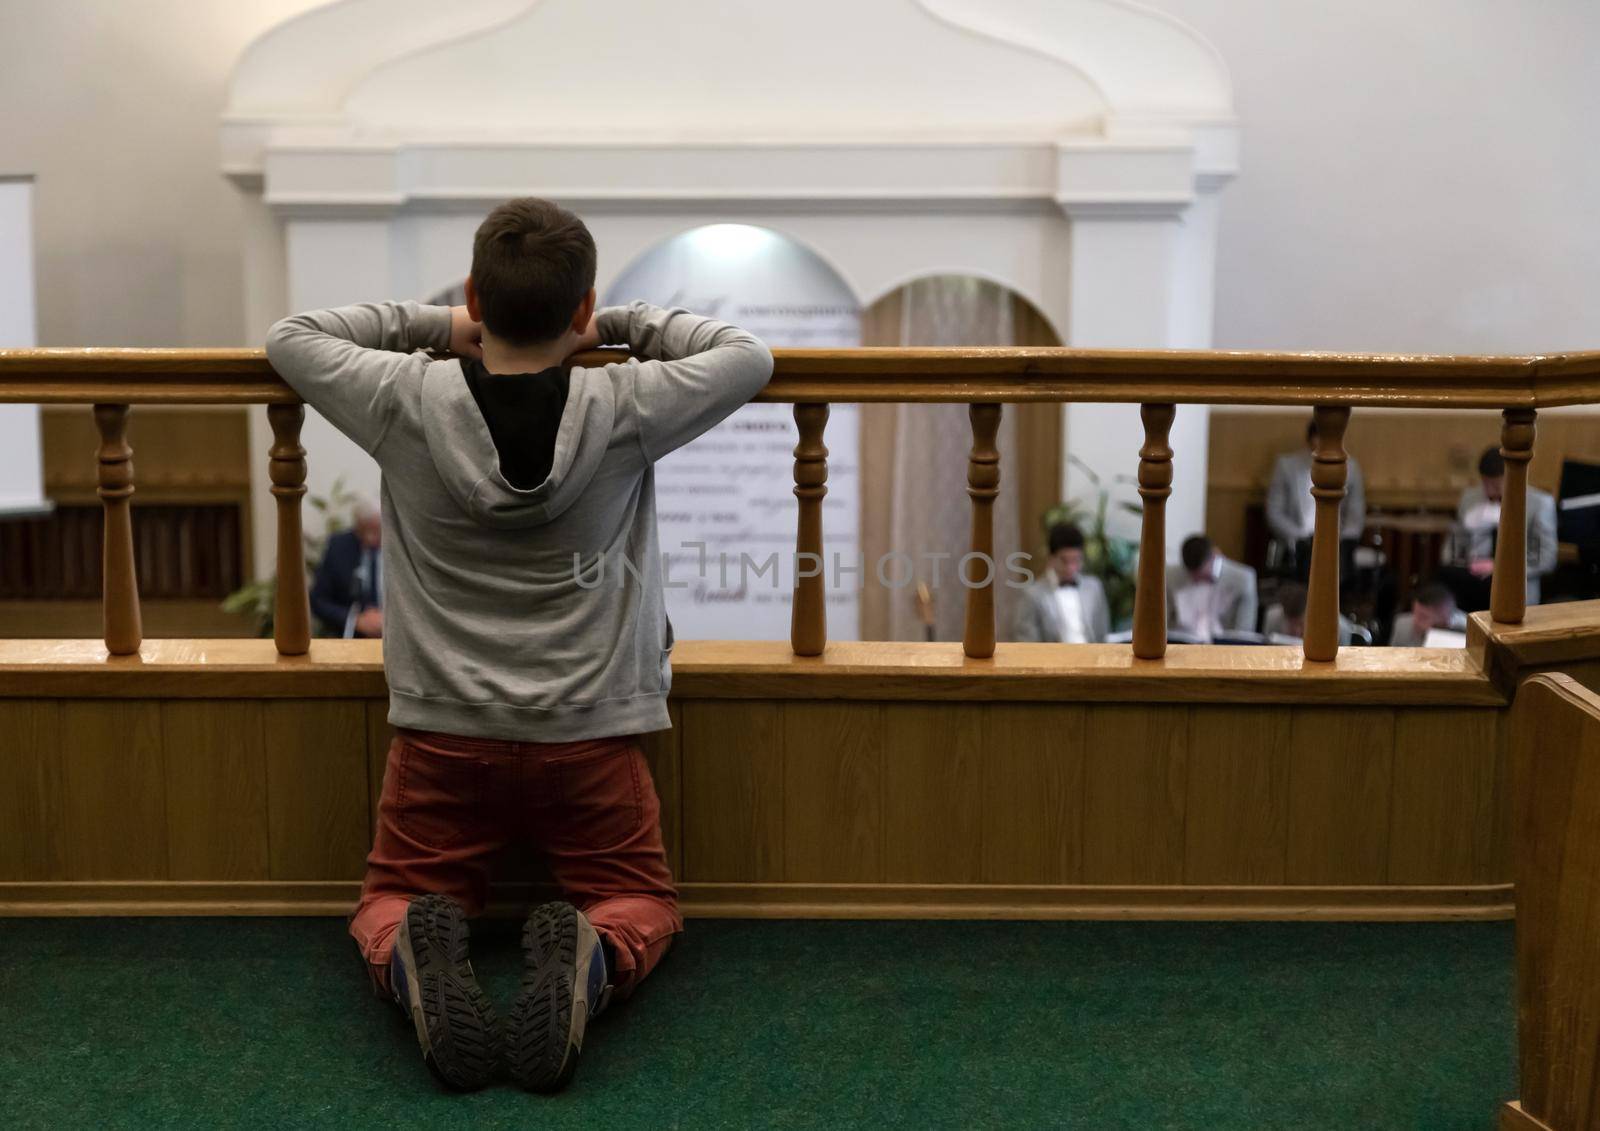 Rear view of a little boy kneeling and praying in a church